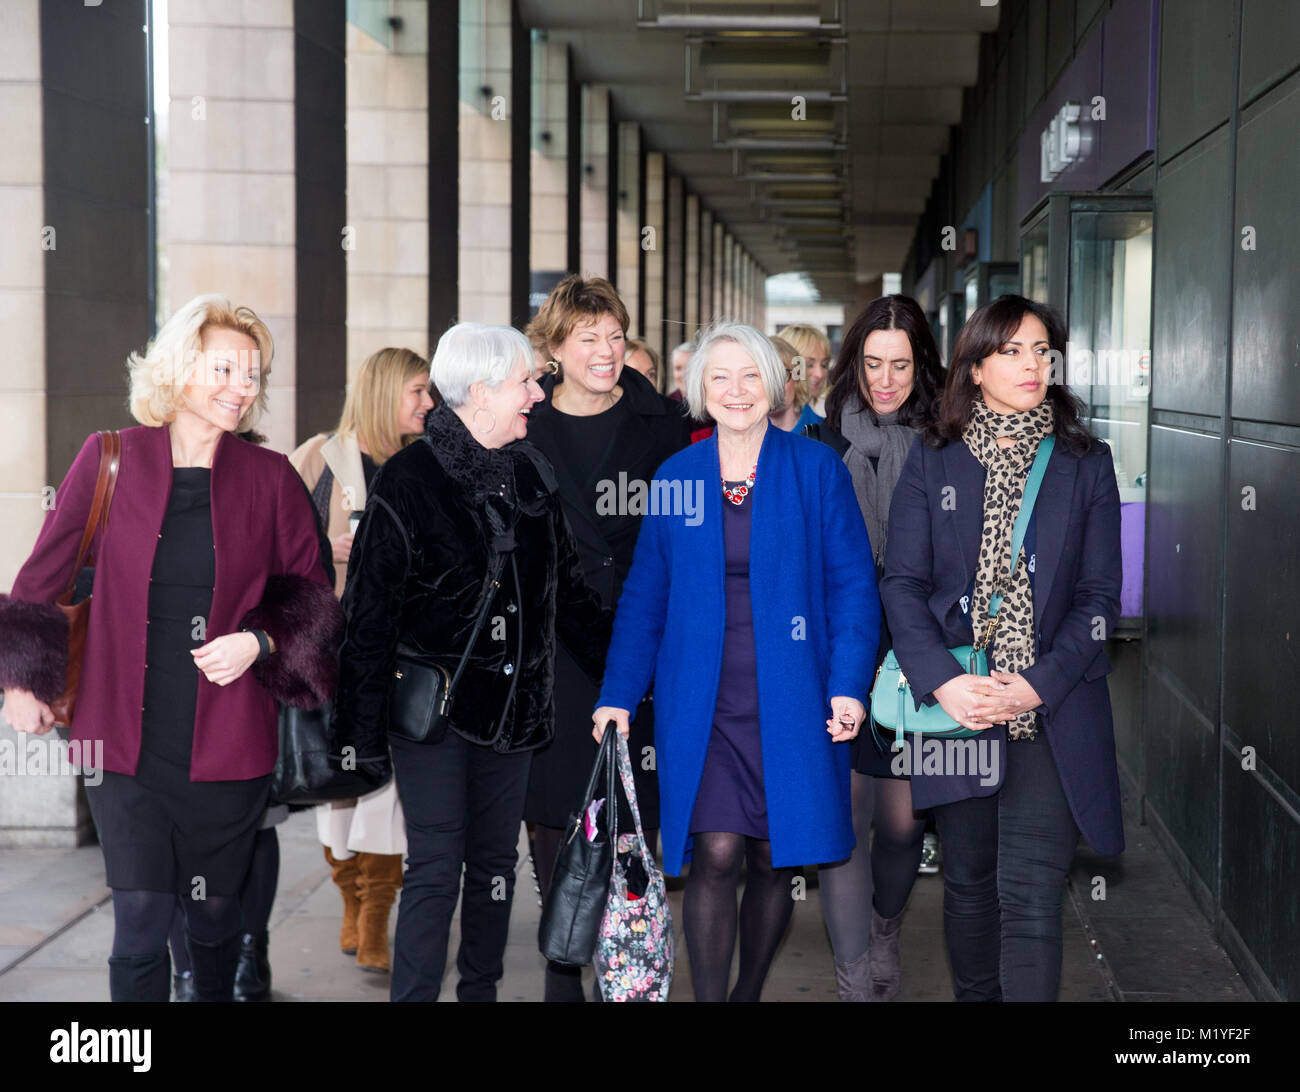 Newscasters and Journalists including, Kate Silverton, Kate Adie, Mariella Frostrup, arrive at Portcullis House for the BBC pay gender debate. Stock Photo